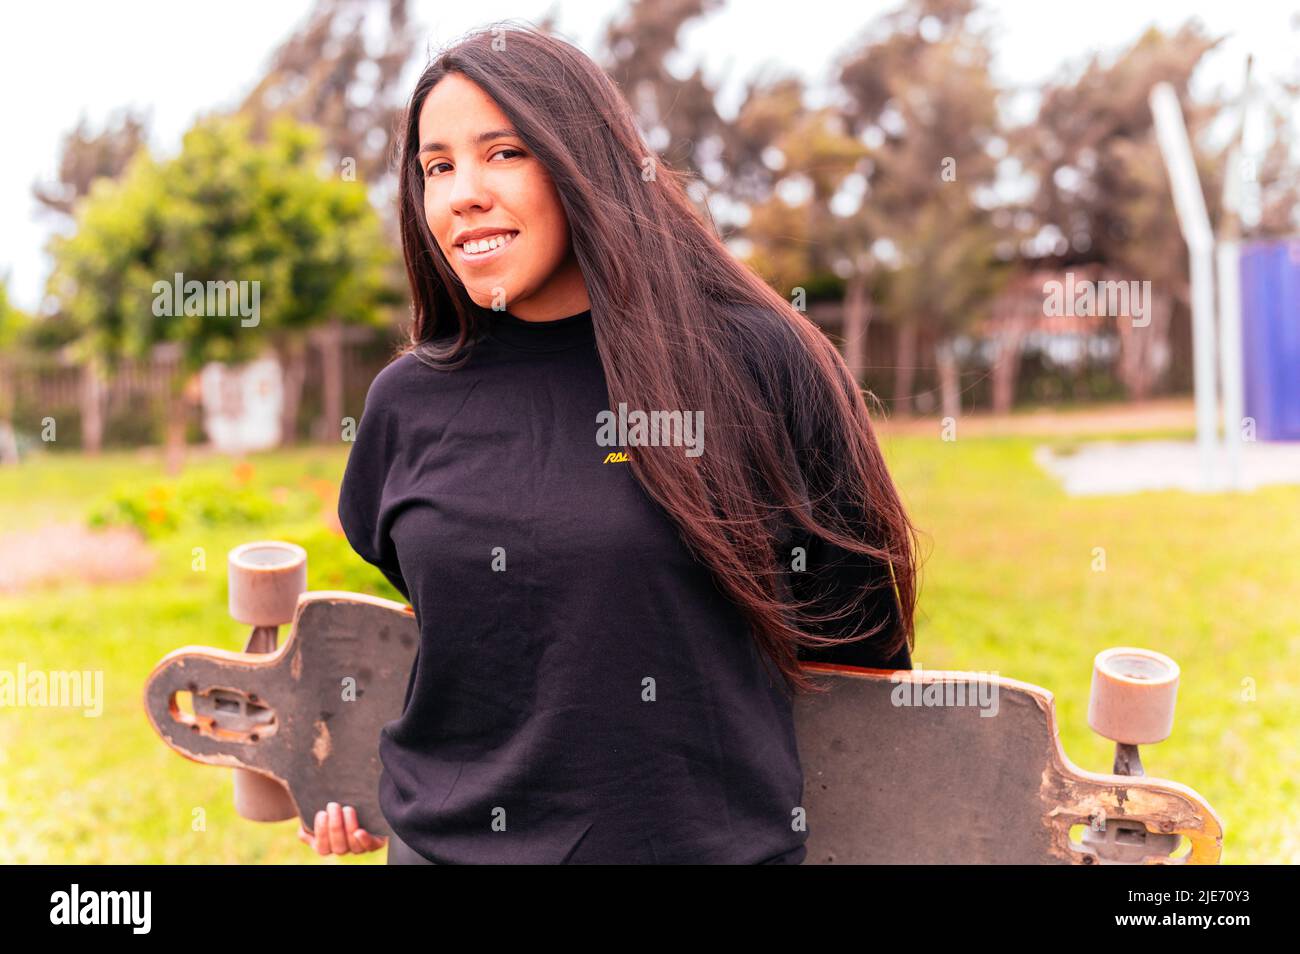 Portrait of smiling young female skateboarder holding her skateboard. Woman with skating board at skate park looking at camera outdoors Stock Photo